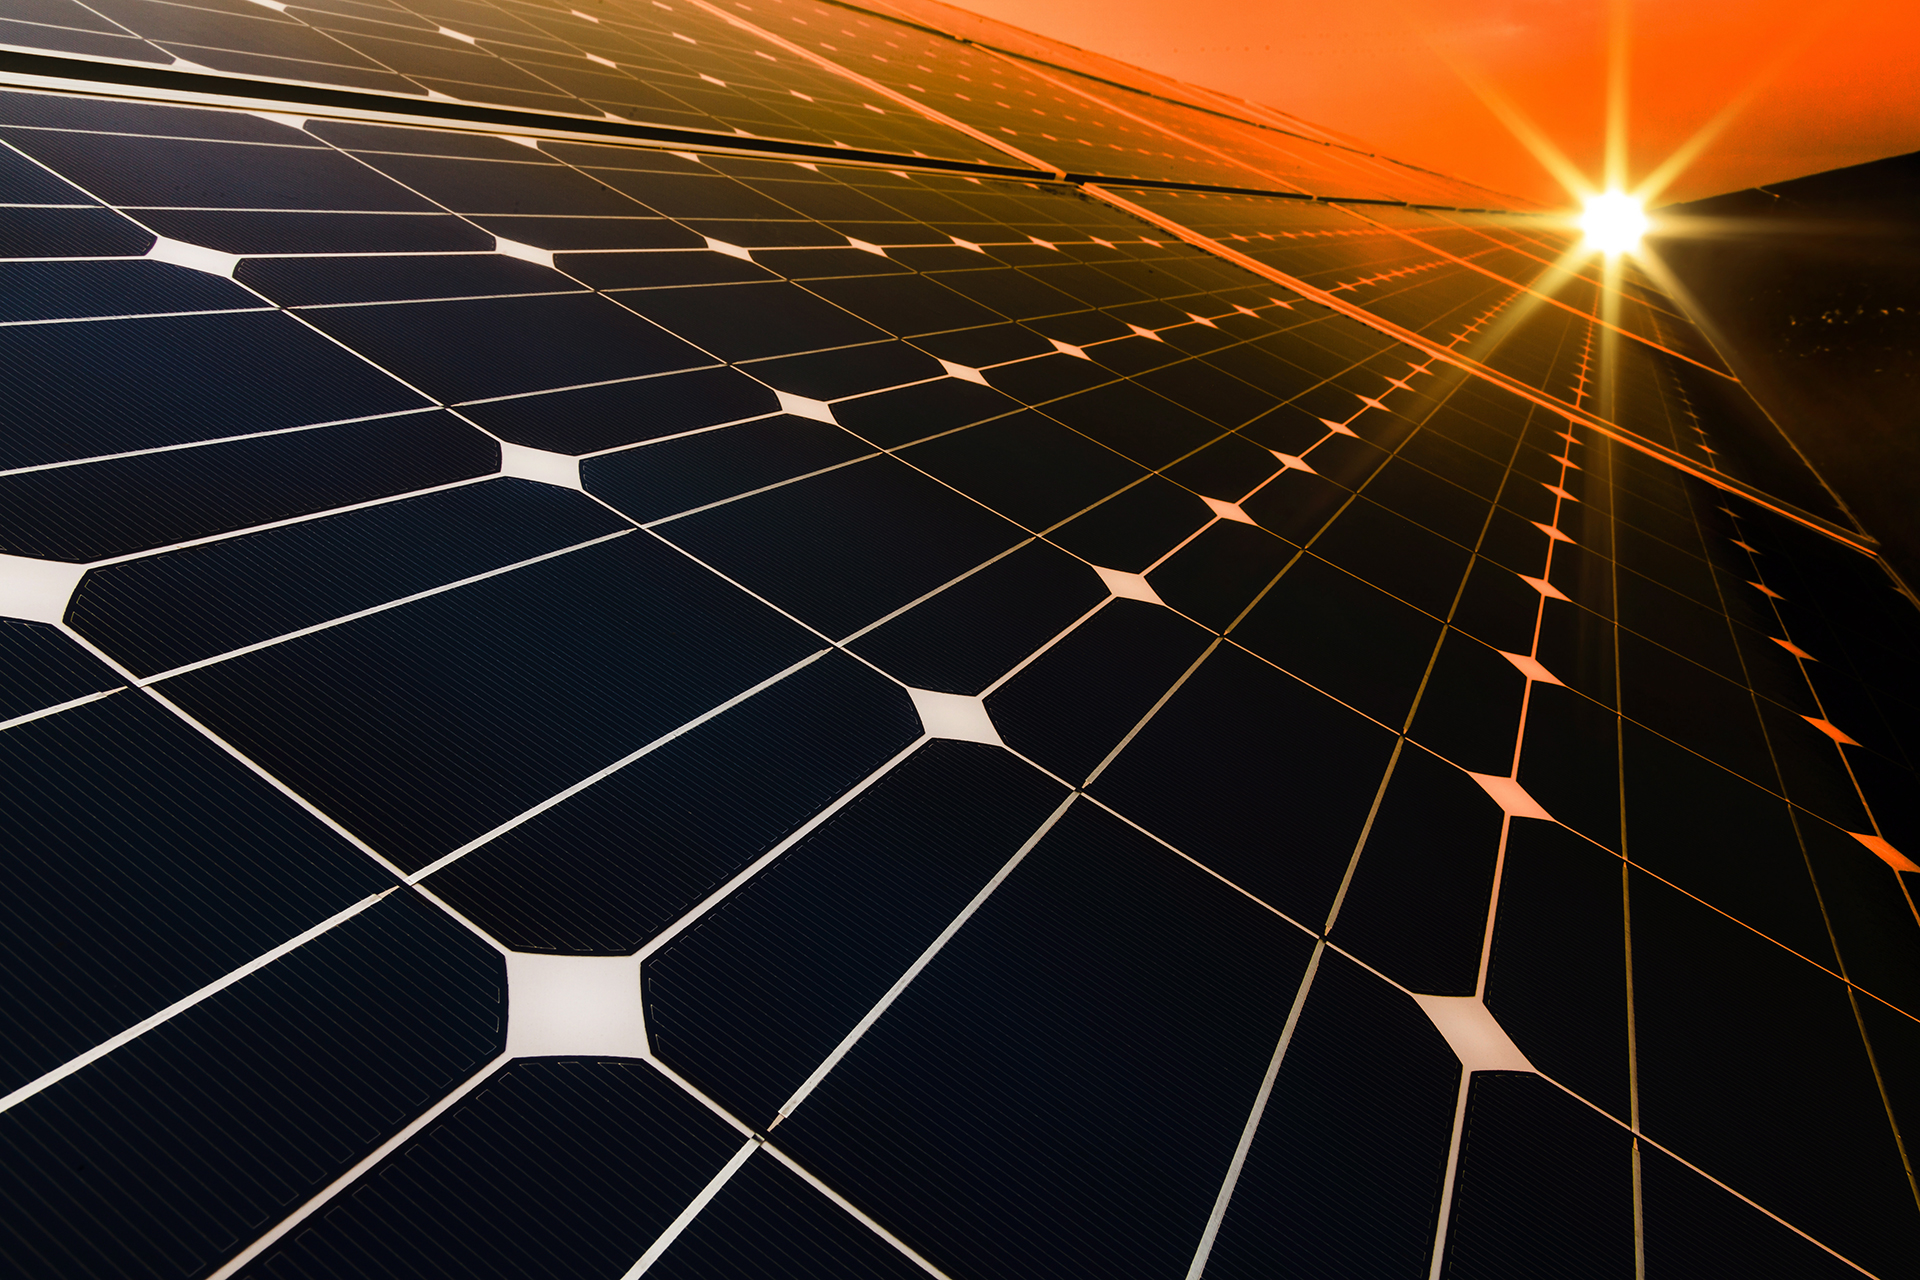 What Are The Advantages of A Monocrystalline Solar Panel?